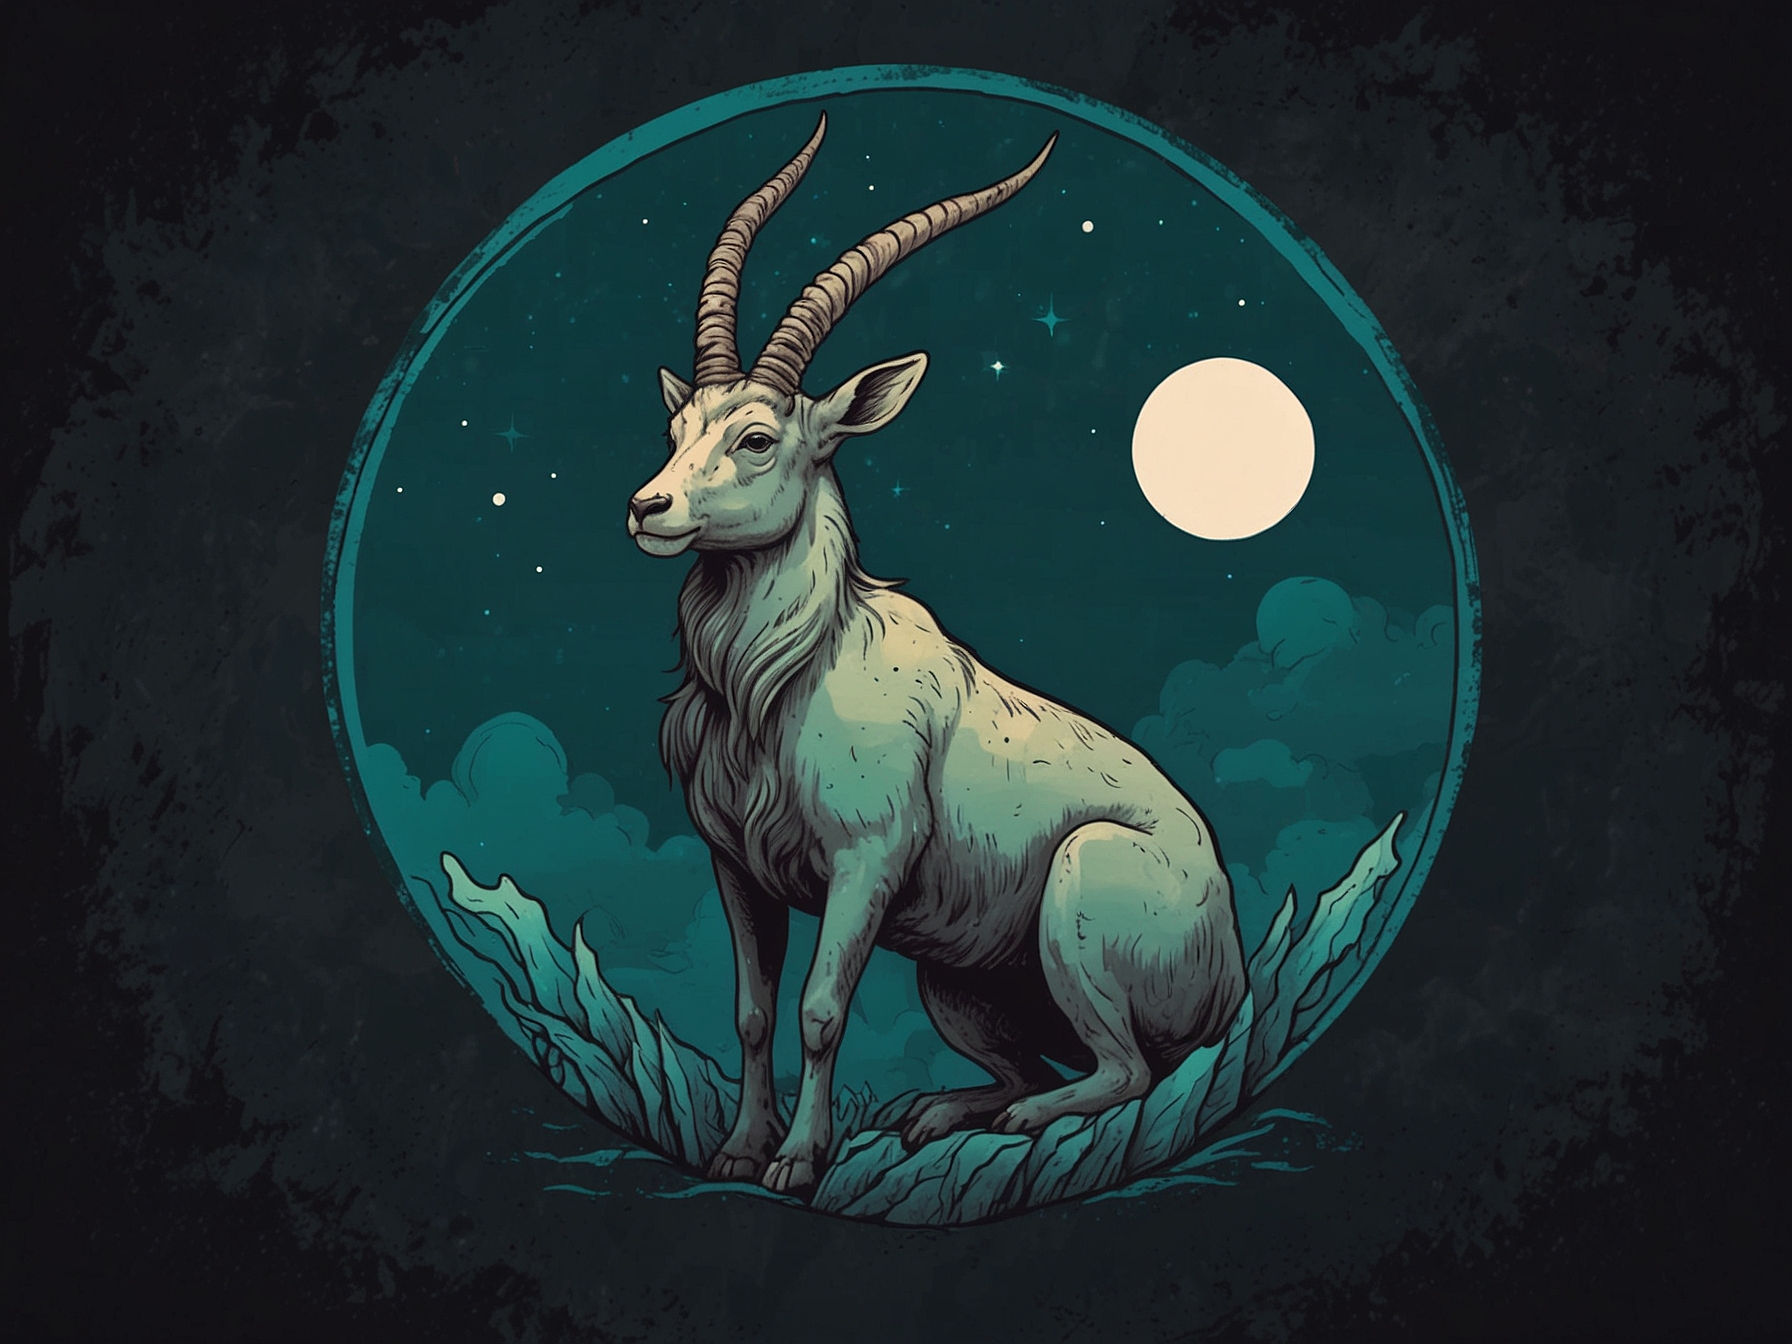 An illustration of a Capricorn symbol with calm, tranquil background colors, emphasizing the need for the Capricorn to focus on personal well-being and self-care.